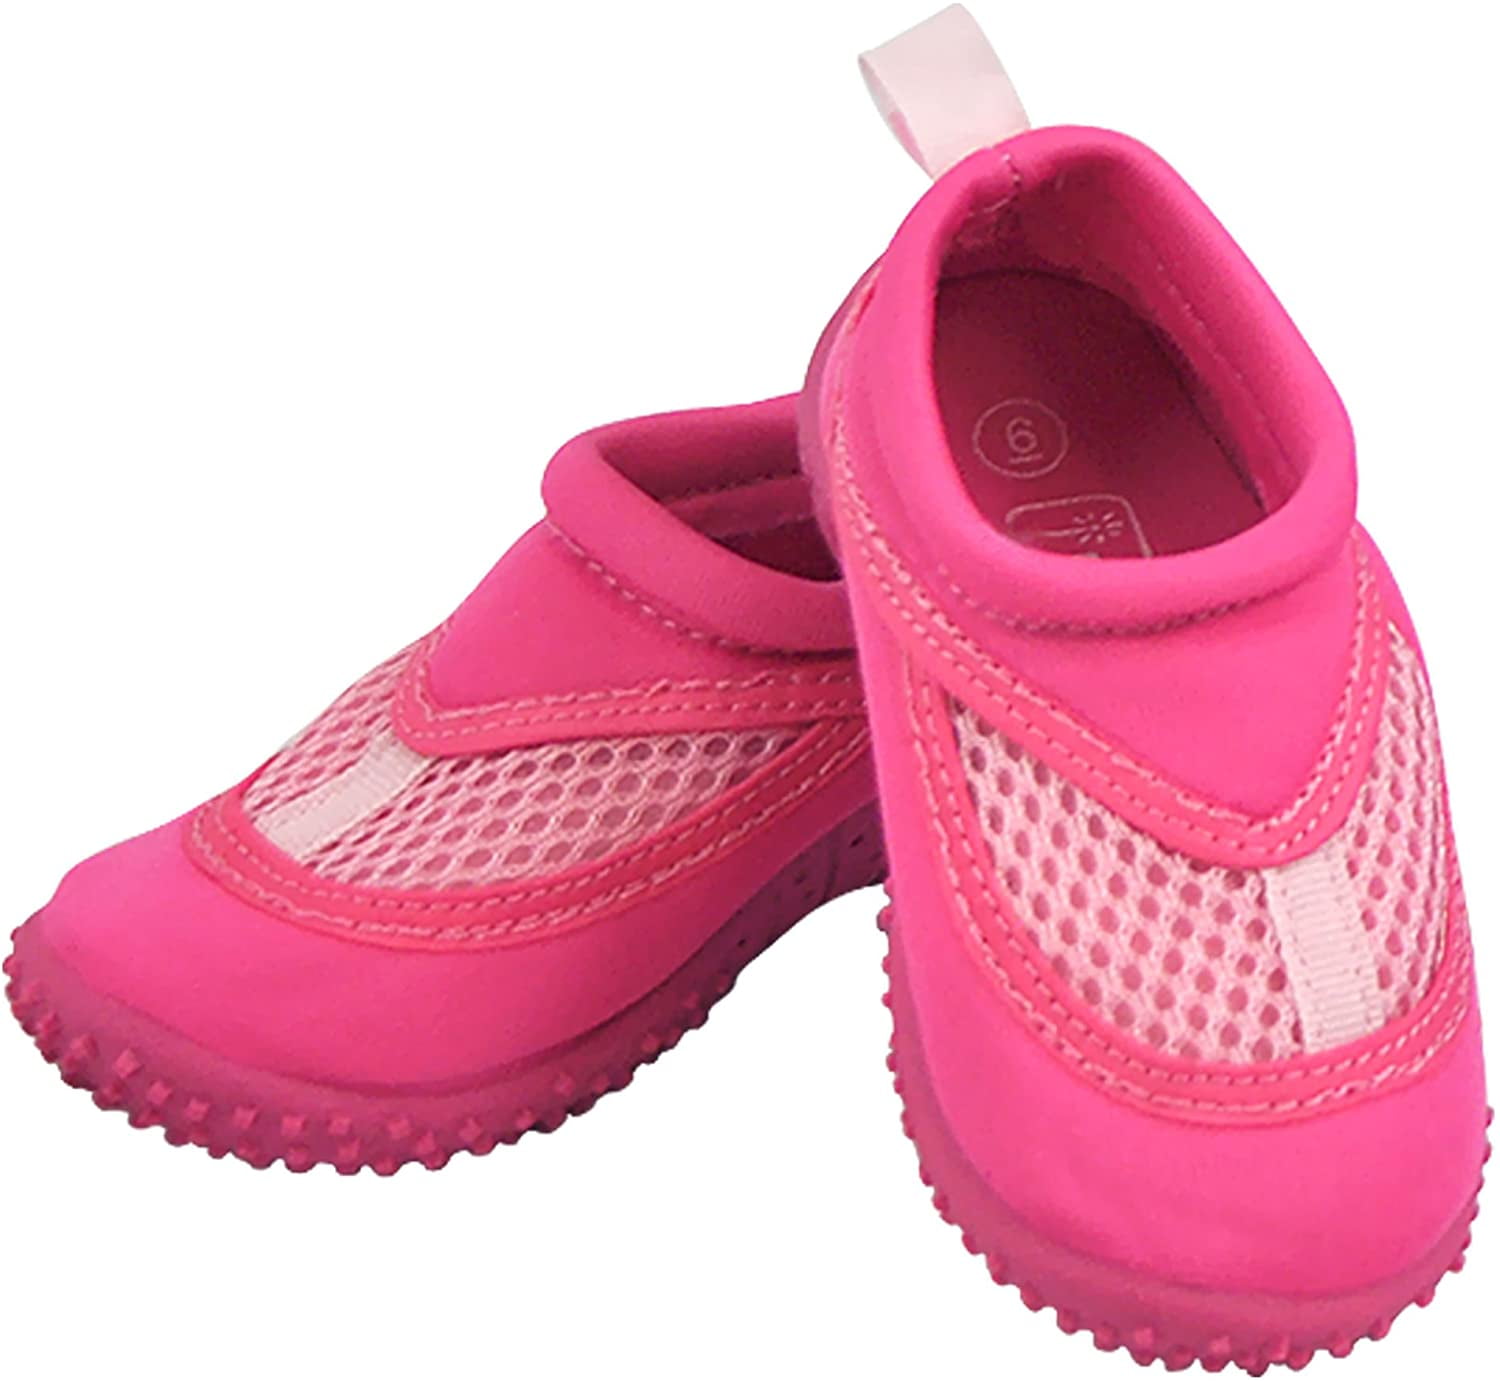 Fires Kids Non-Slip Aqua Socks Quick Dry Soft Water Shoes for Beach Pool